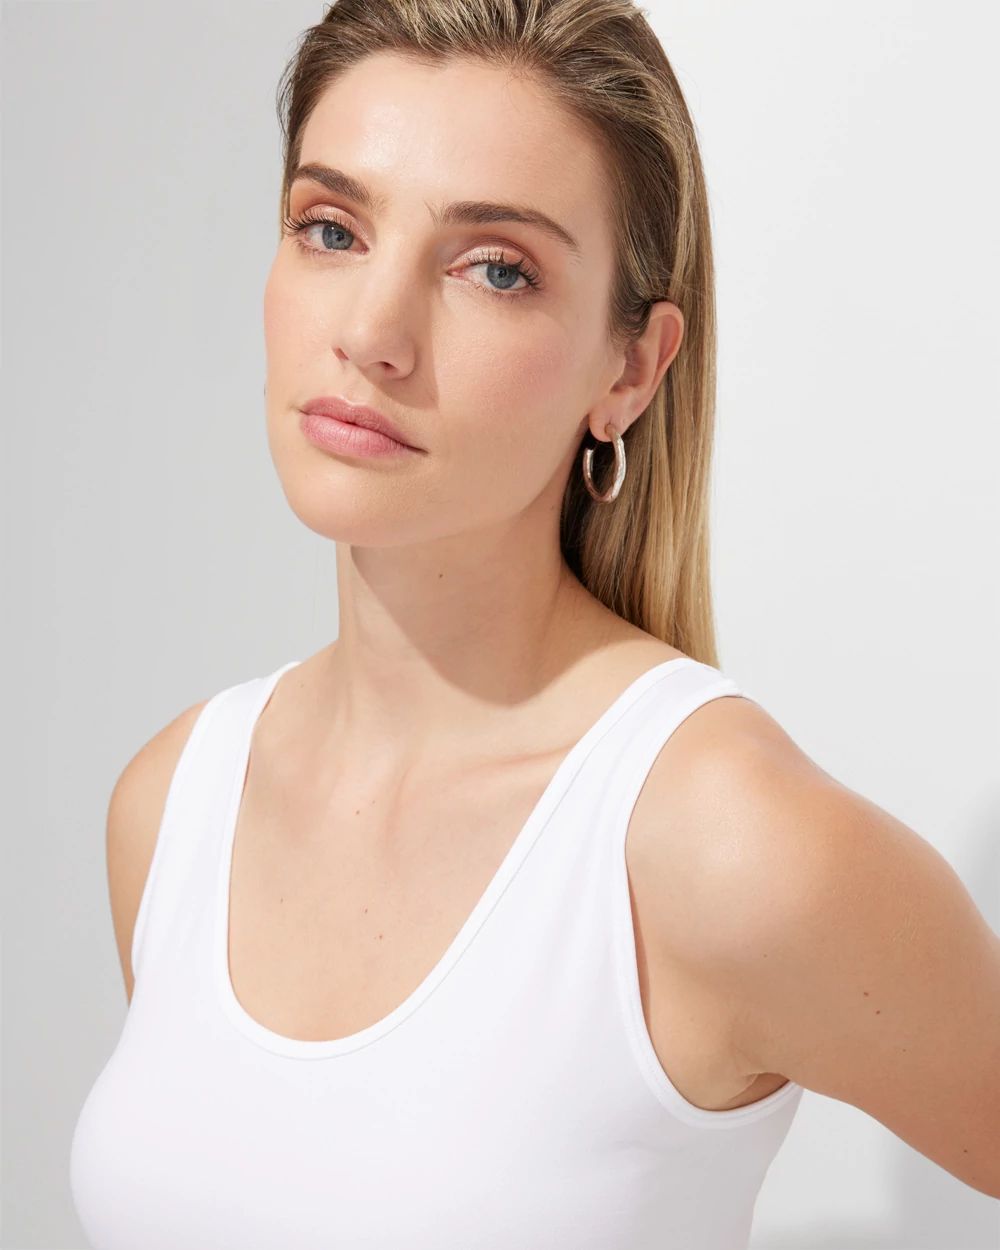 Outlet WHBM Convertible Neckline Tank